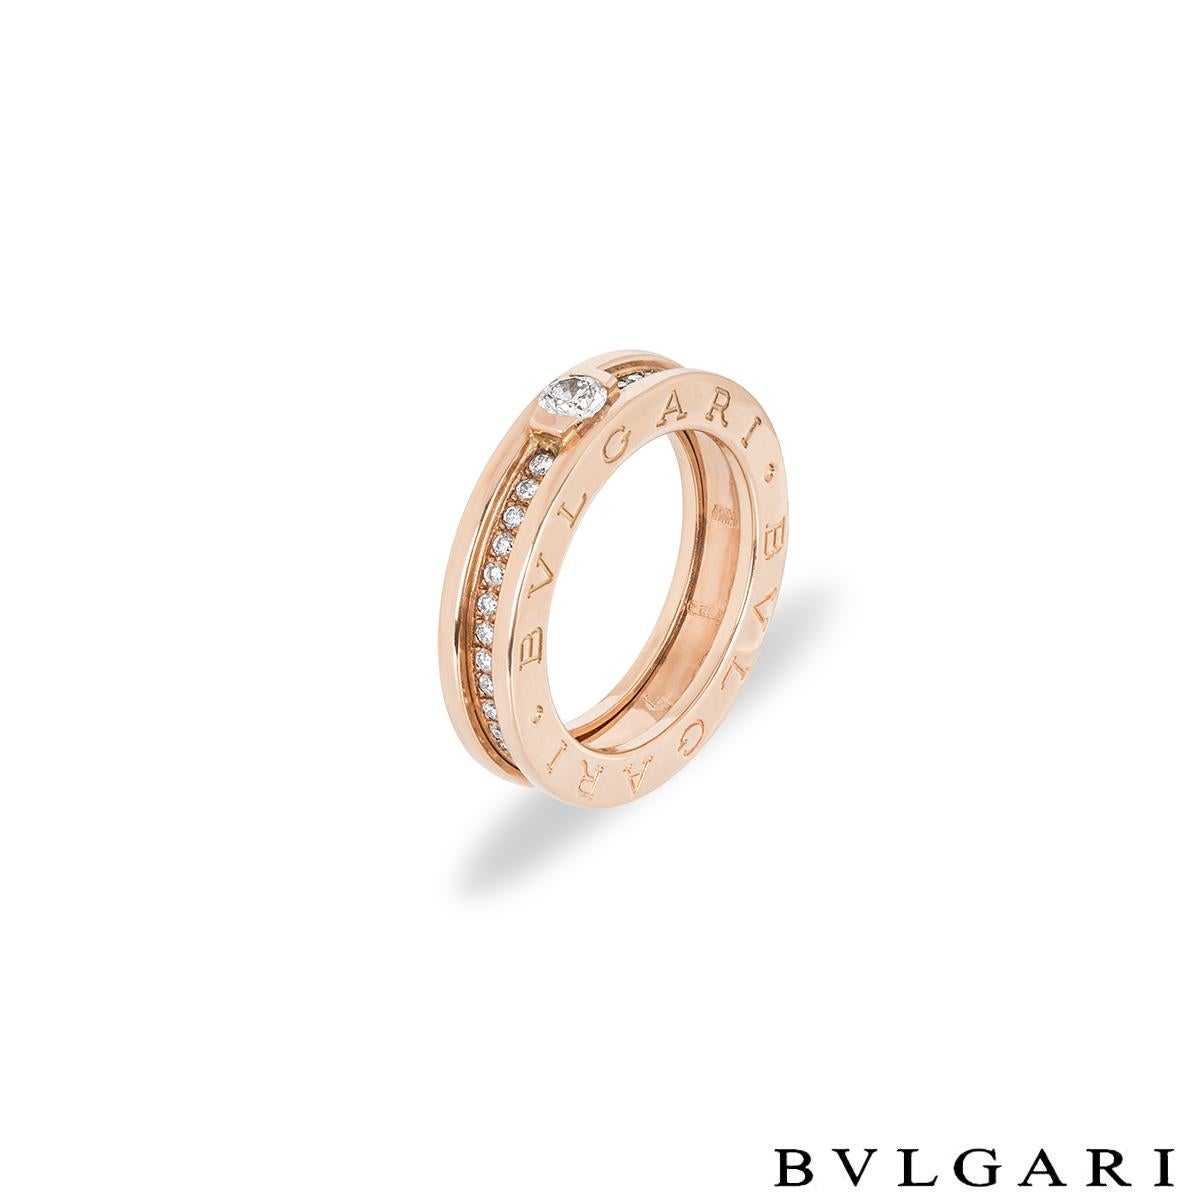 An 18k rose gold diamond Bvlgari ring from the B.Zero1 collection. Set to the centre of the ring is a 0.30ct round brilliant cut diamond in a tension setting, F in colour and VVS2 in clarity. Accentuating the centre stone are 40 round brilliant cut